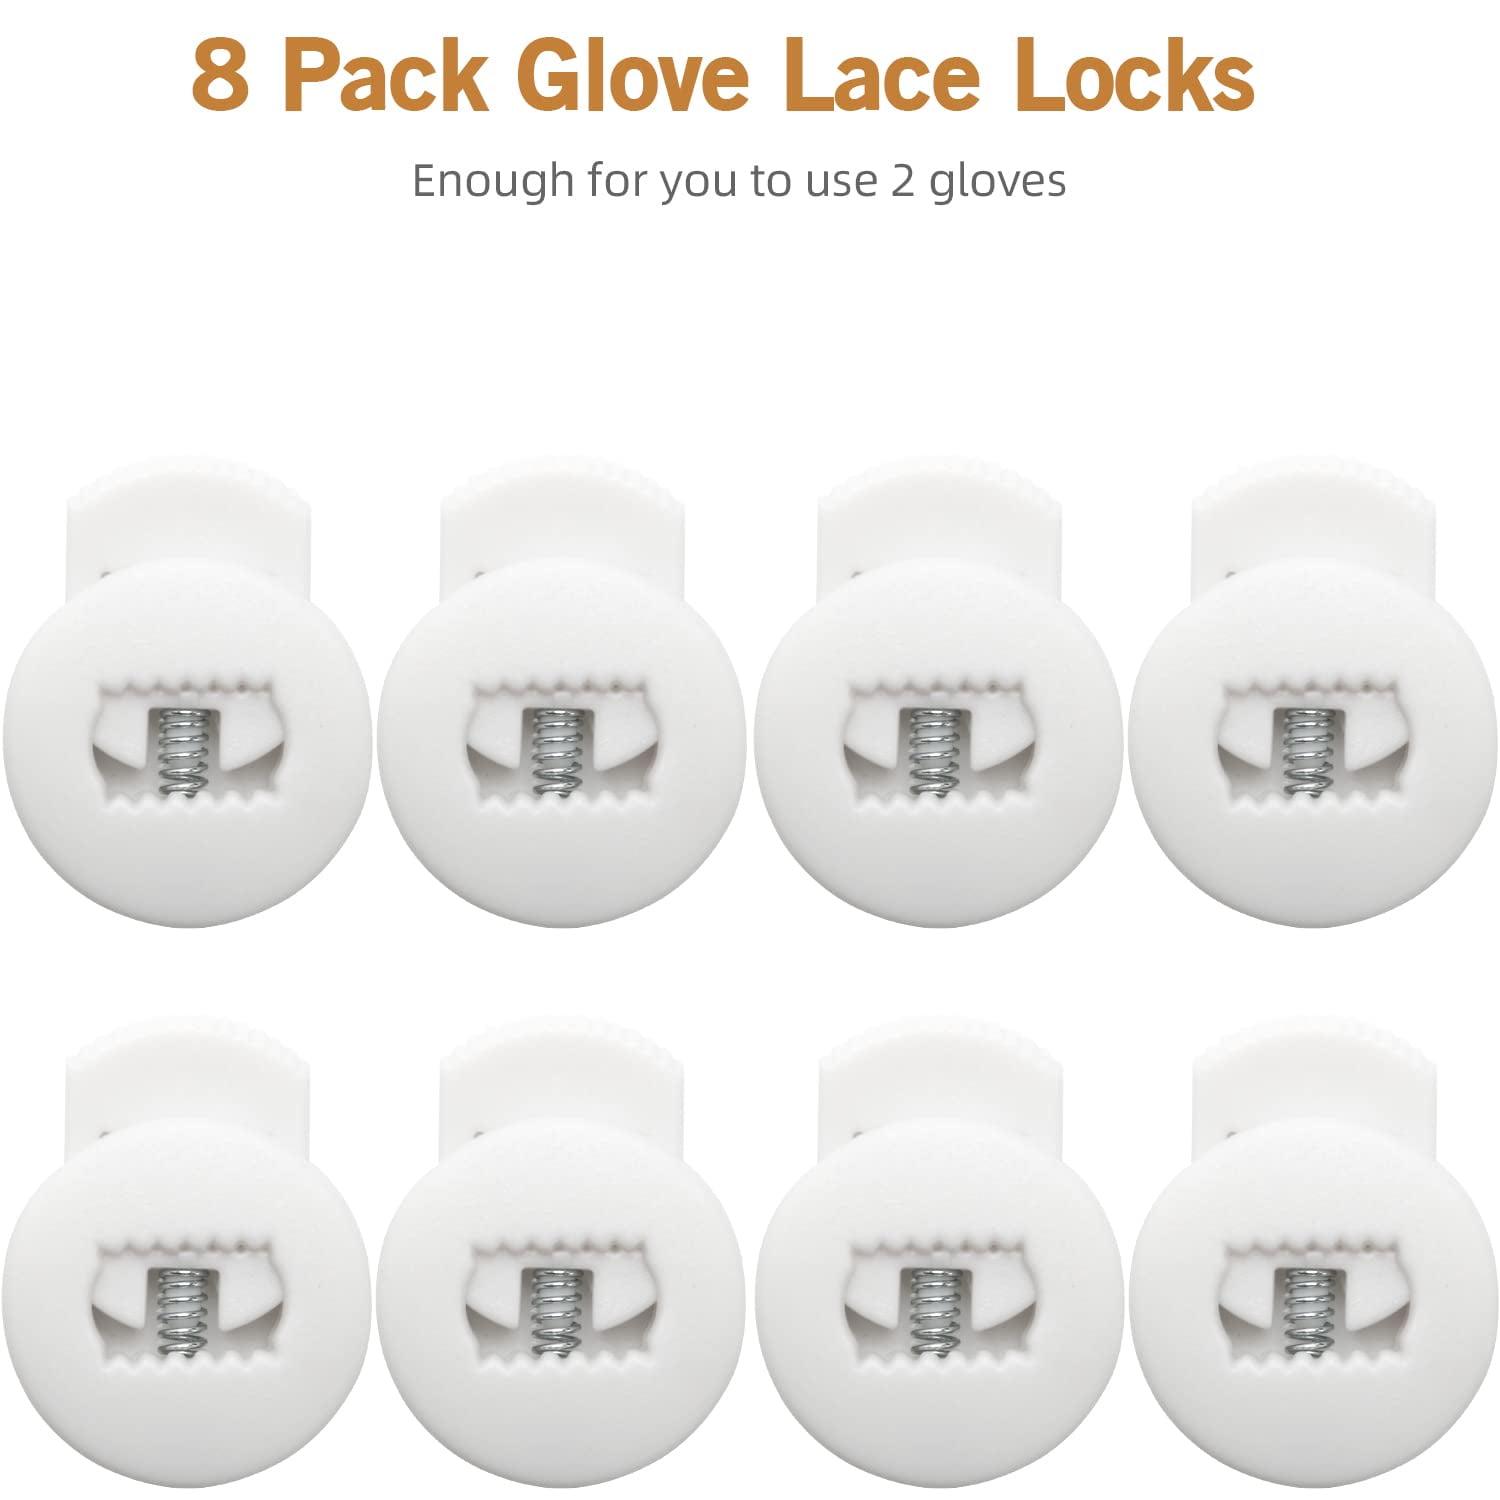 Jomeya Glove Locks, Lace Locks for Baseball Glove 8 Pack, No More Knots Required, Universal Fit for Baseball and Softball Gloves